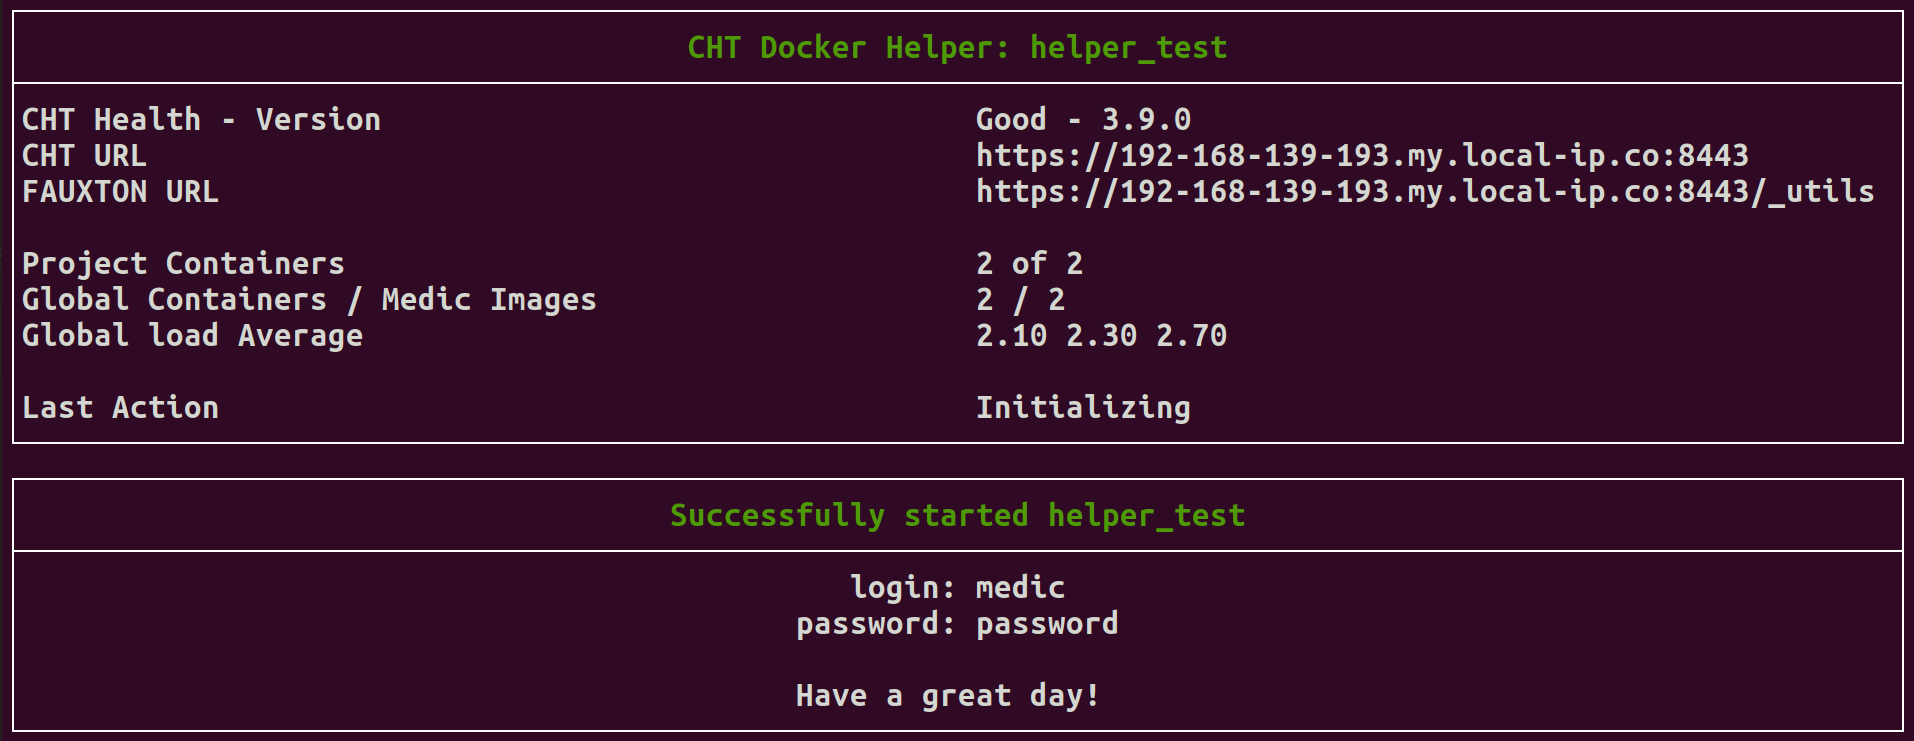 The cht-docker-compose.sh script showing the URL and version of the CHT instance as well as number of containers launched, global container count, medic images downloaded count and OS load average. Finally a “Successfully started my_first_project” message is shown and denotes the login is “medic” and the password is “password”.